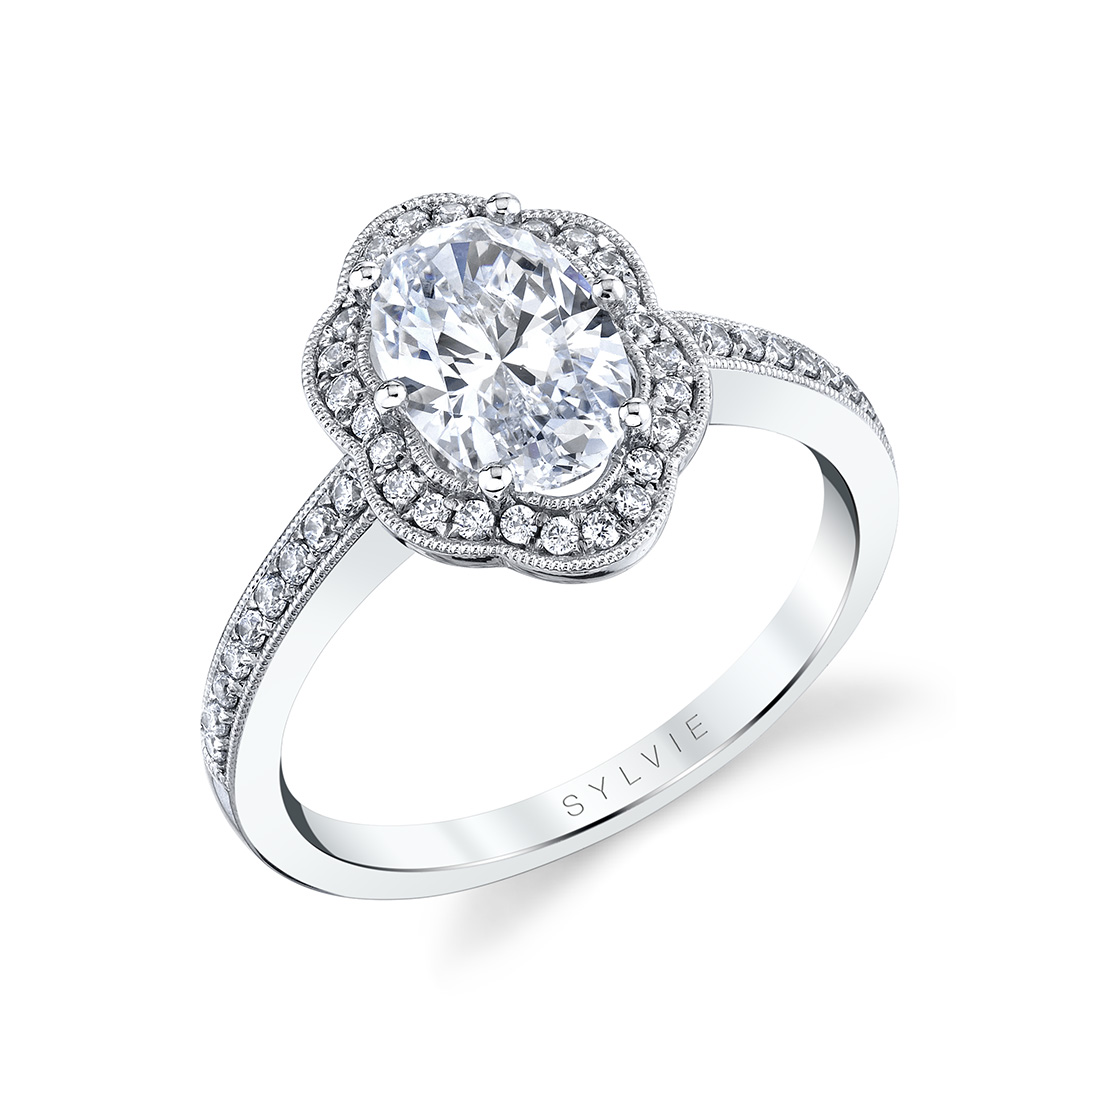 Profile Image of a Flower Halo Engagement Ring